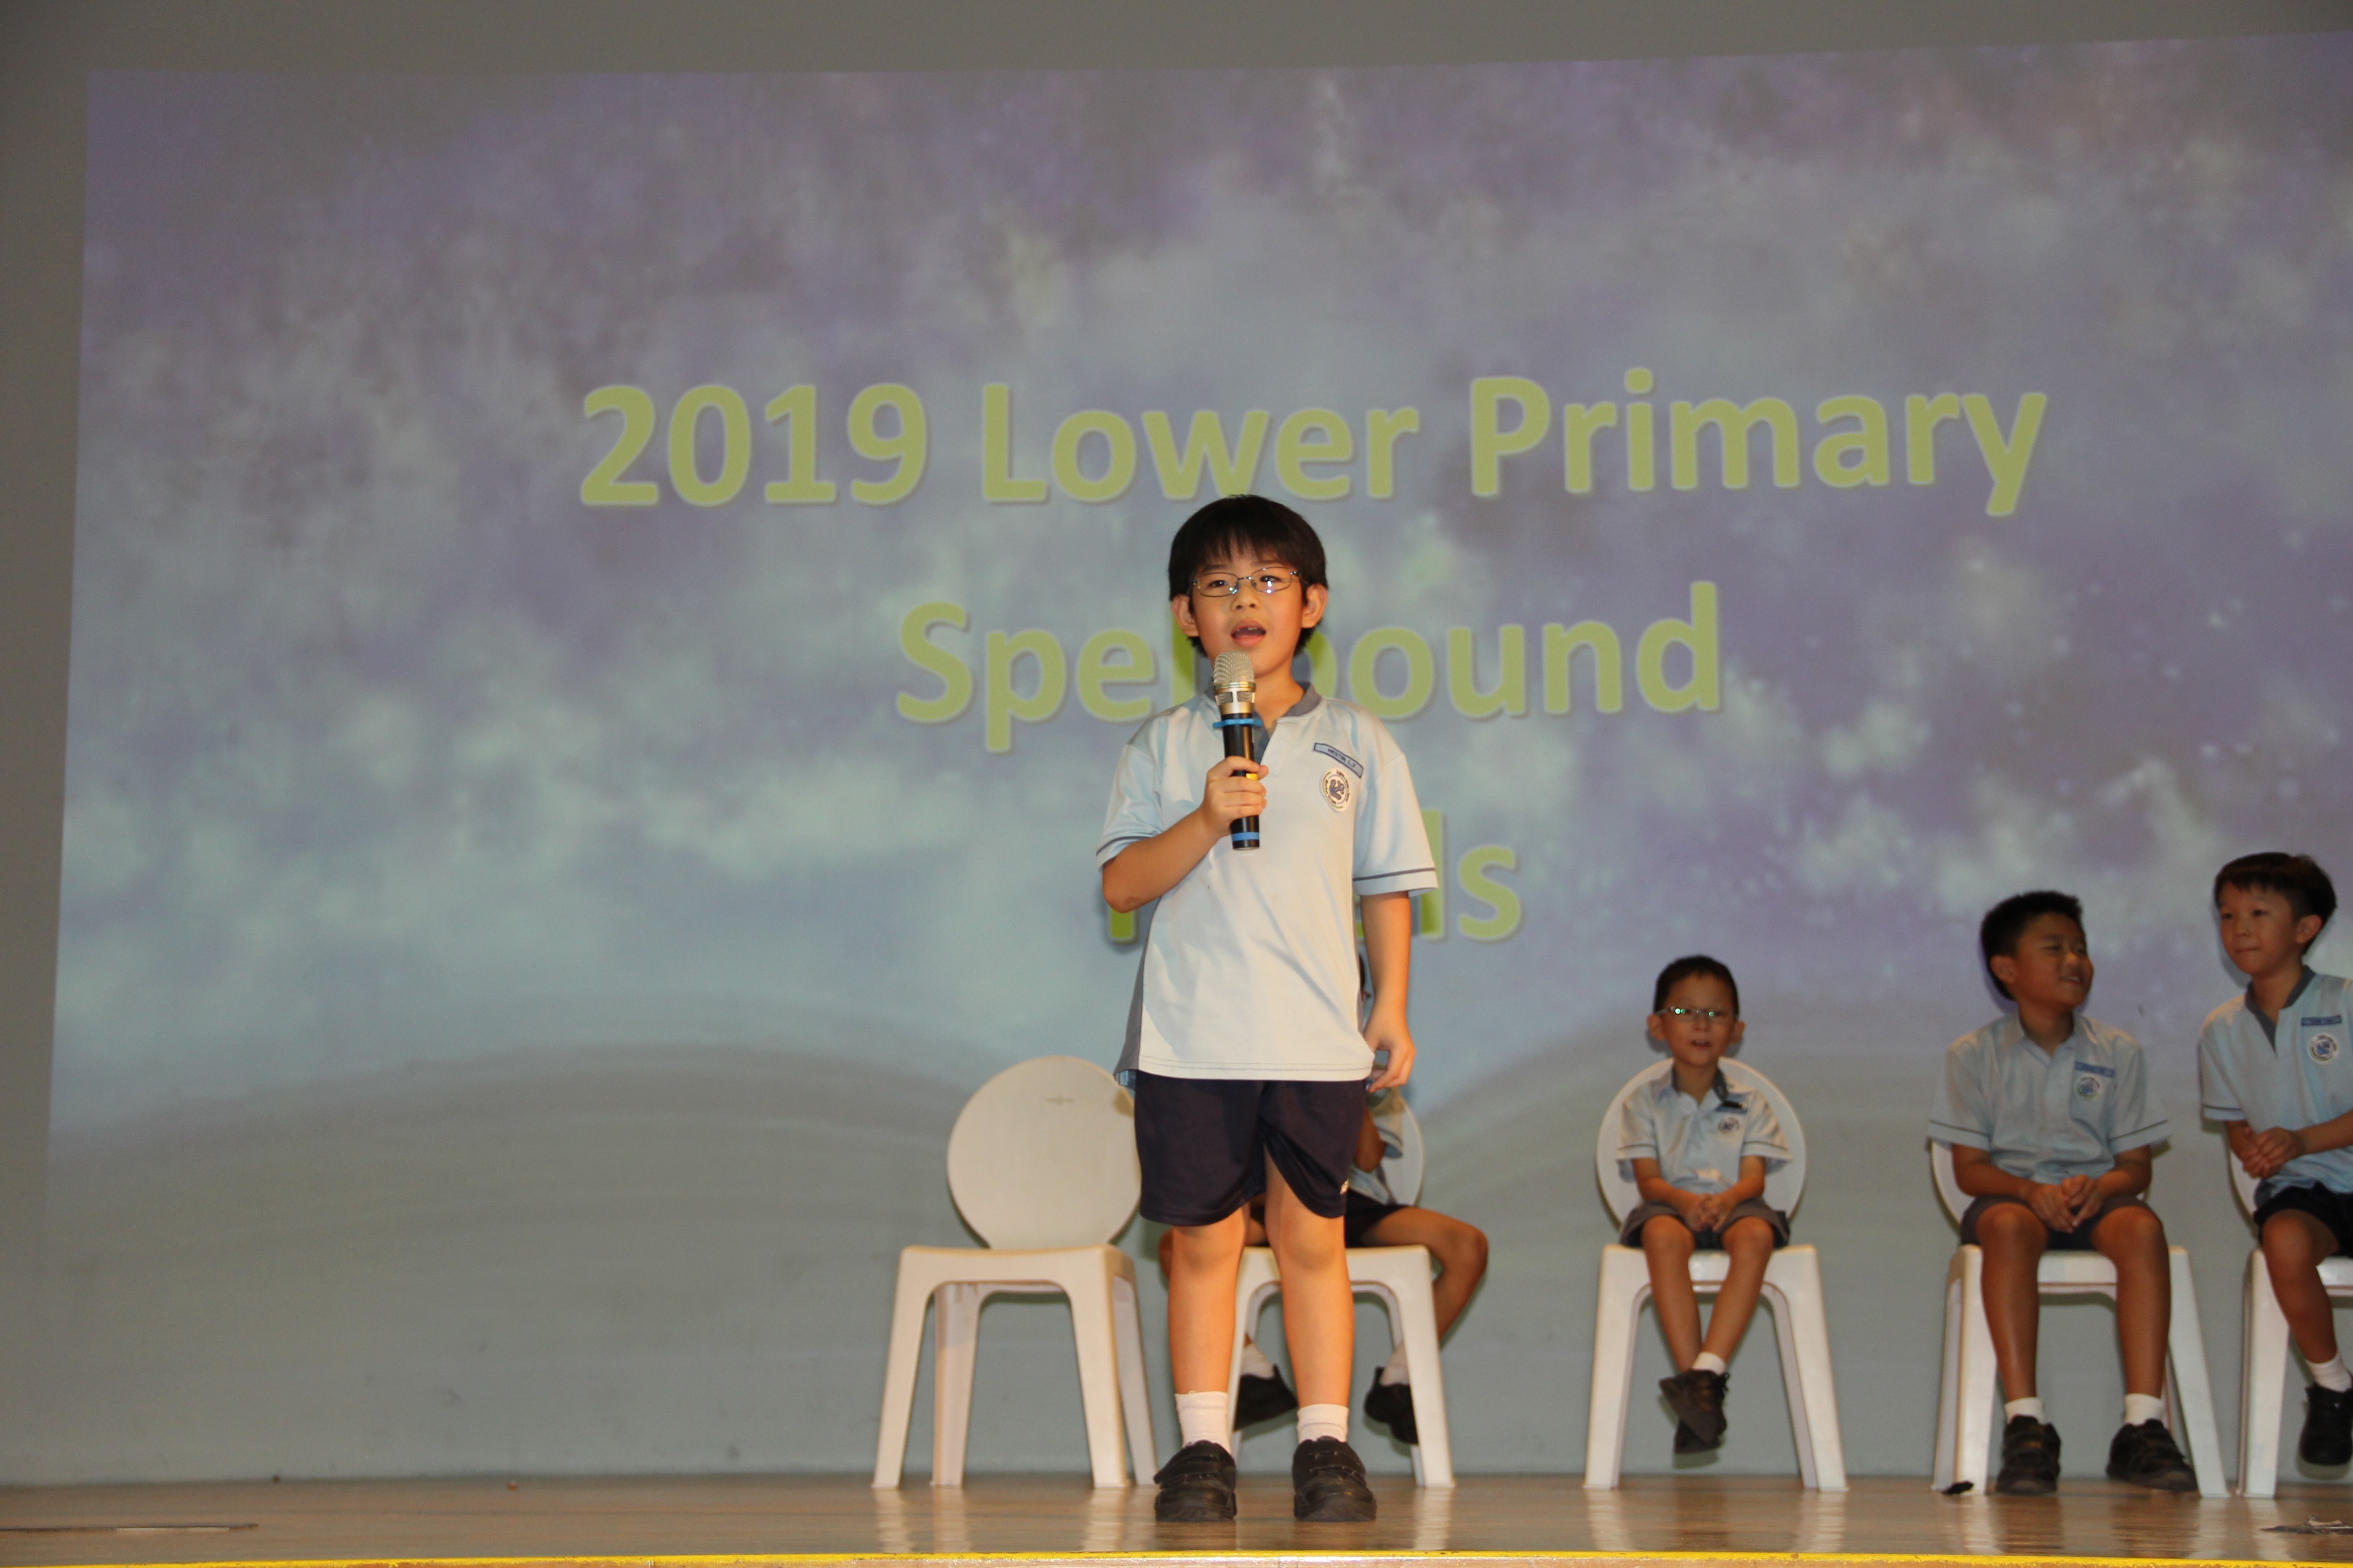 Lower Primary Spell bound Final